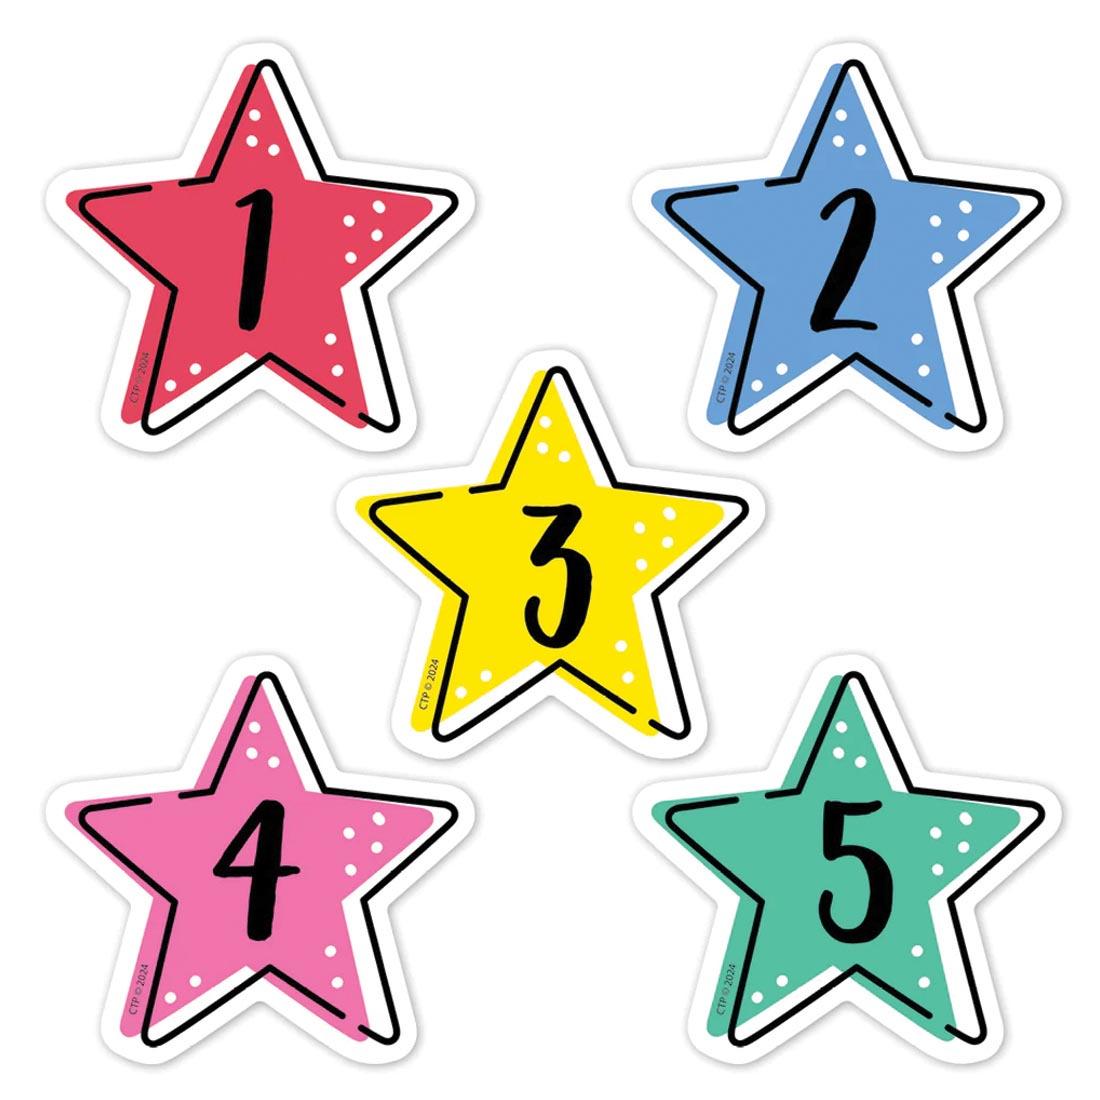 five Calendar Days from the Star Bright collection by Creative Teaching Press